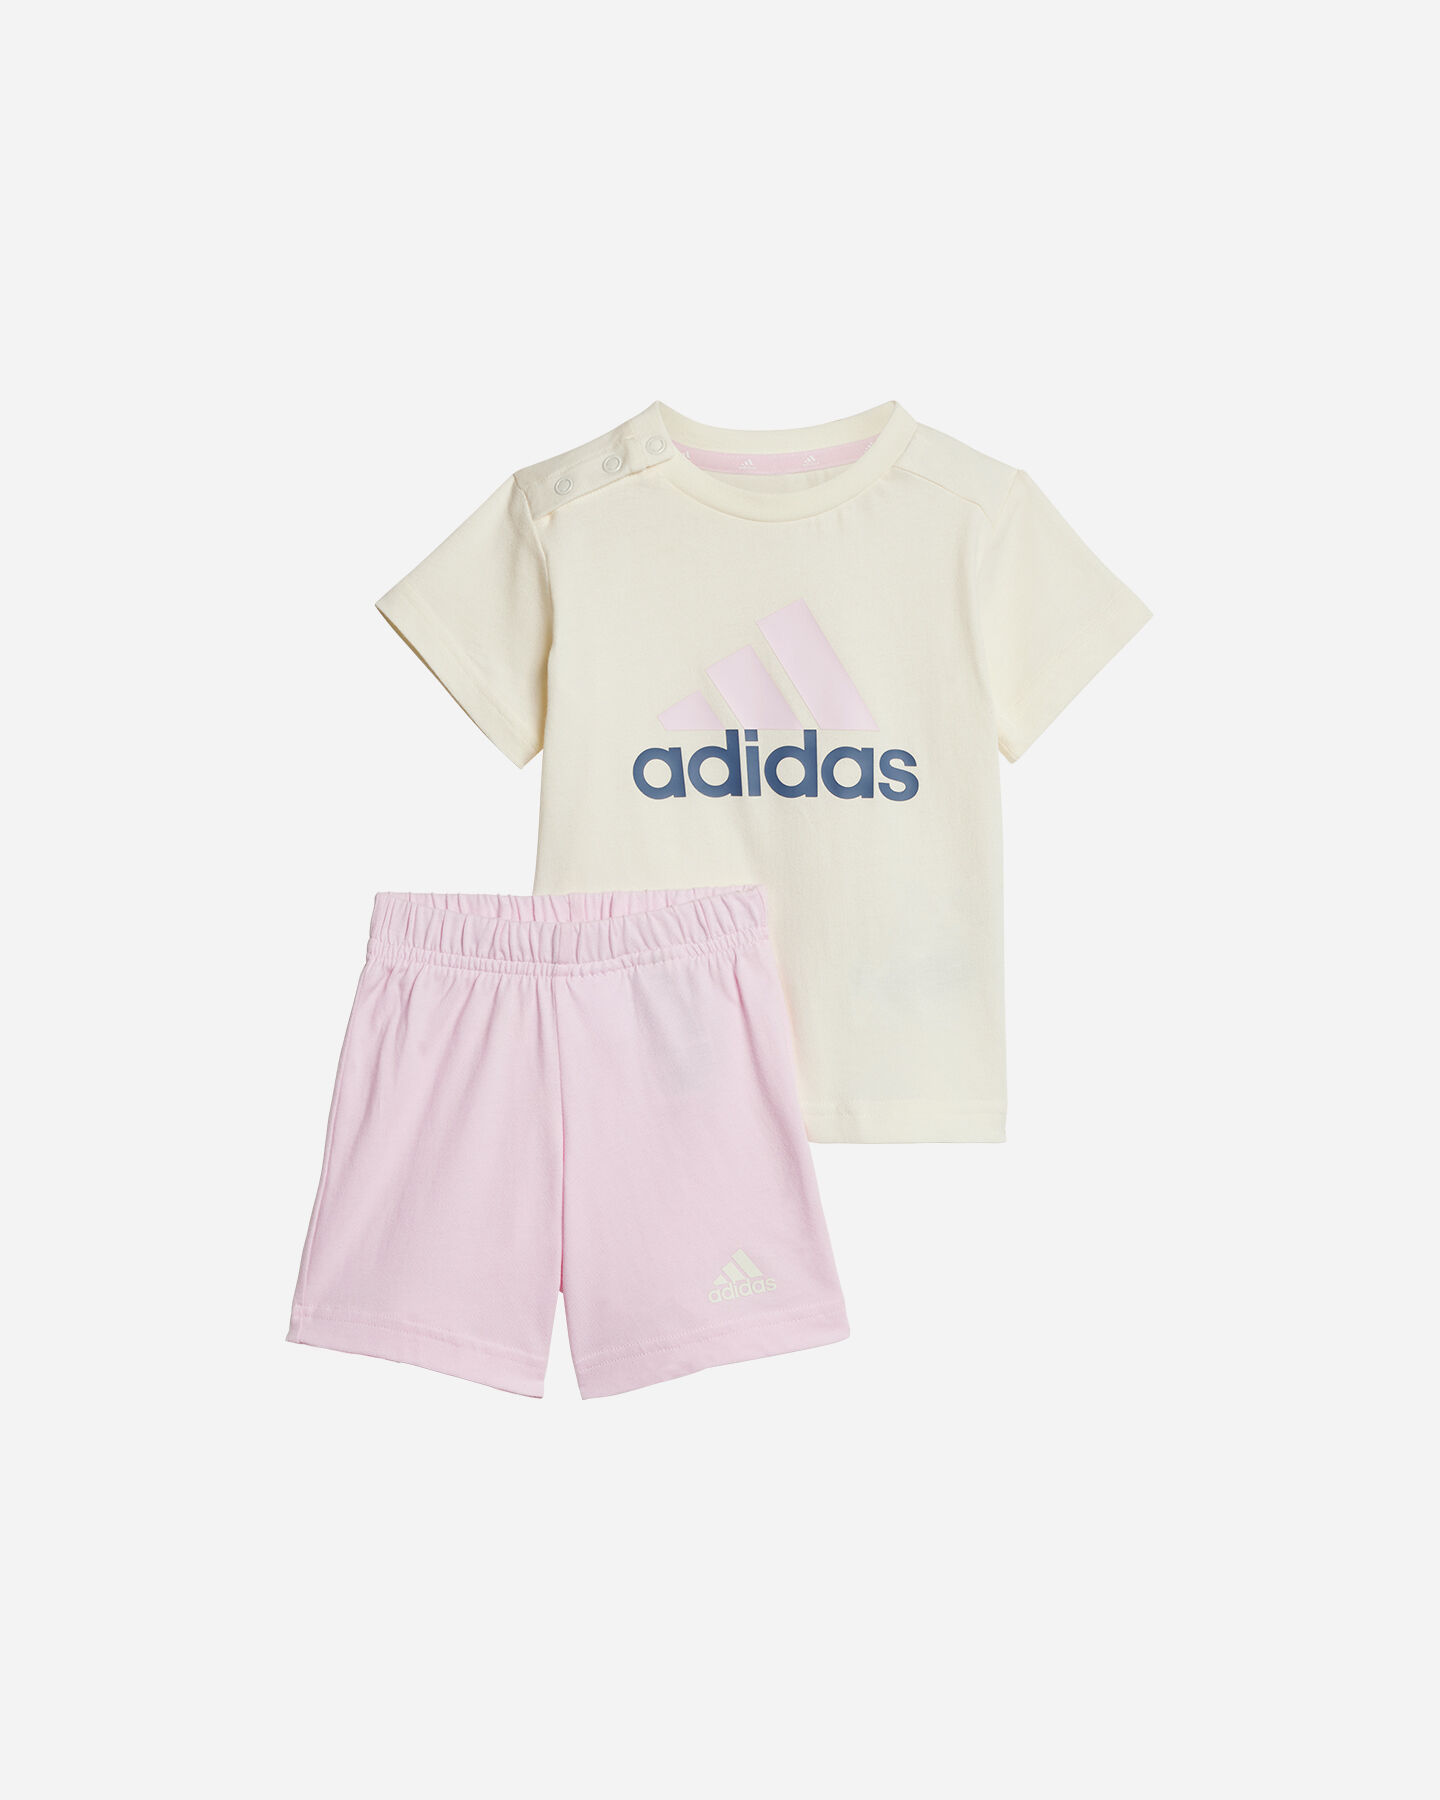  Completo ADIDAS INFANT GIRL JR S5656390|UNI|3-6M scatto 0